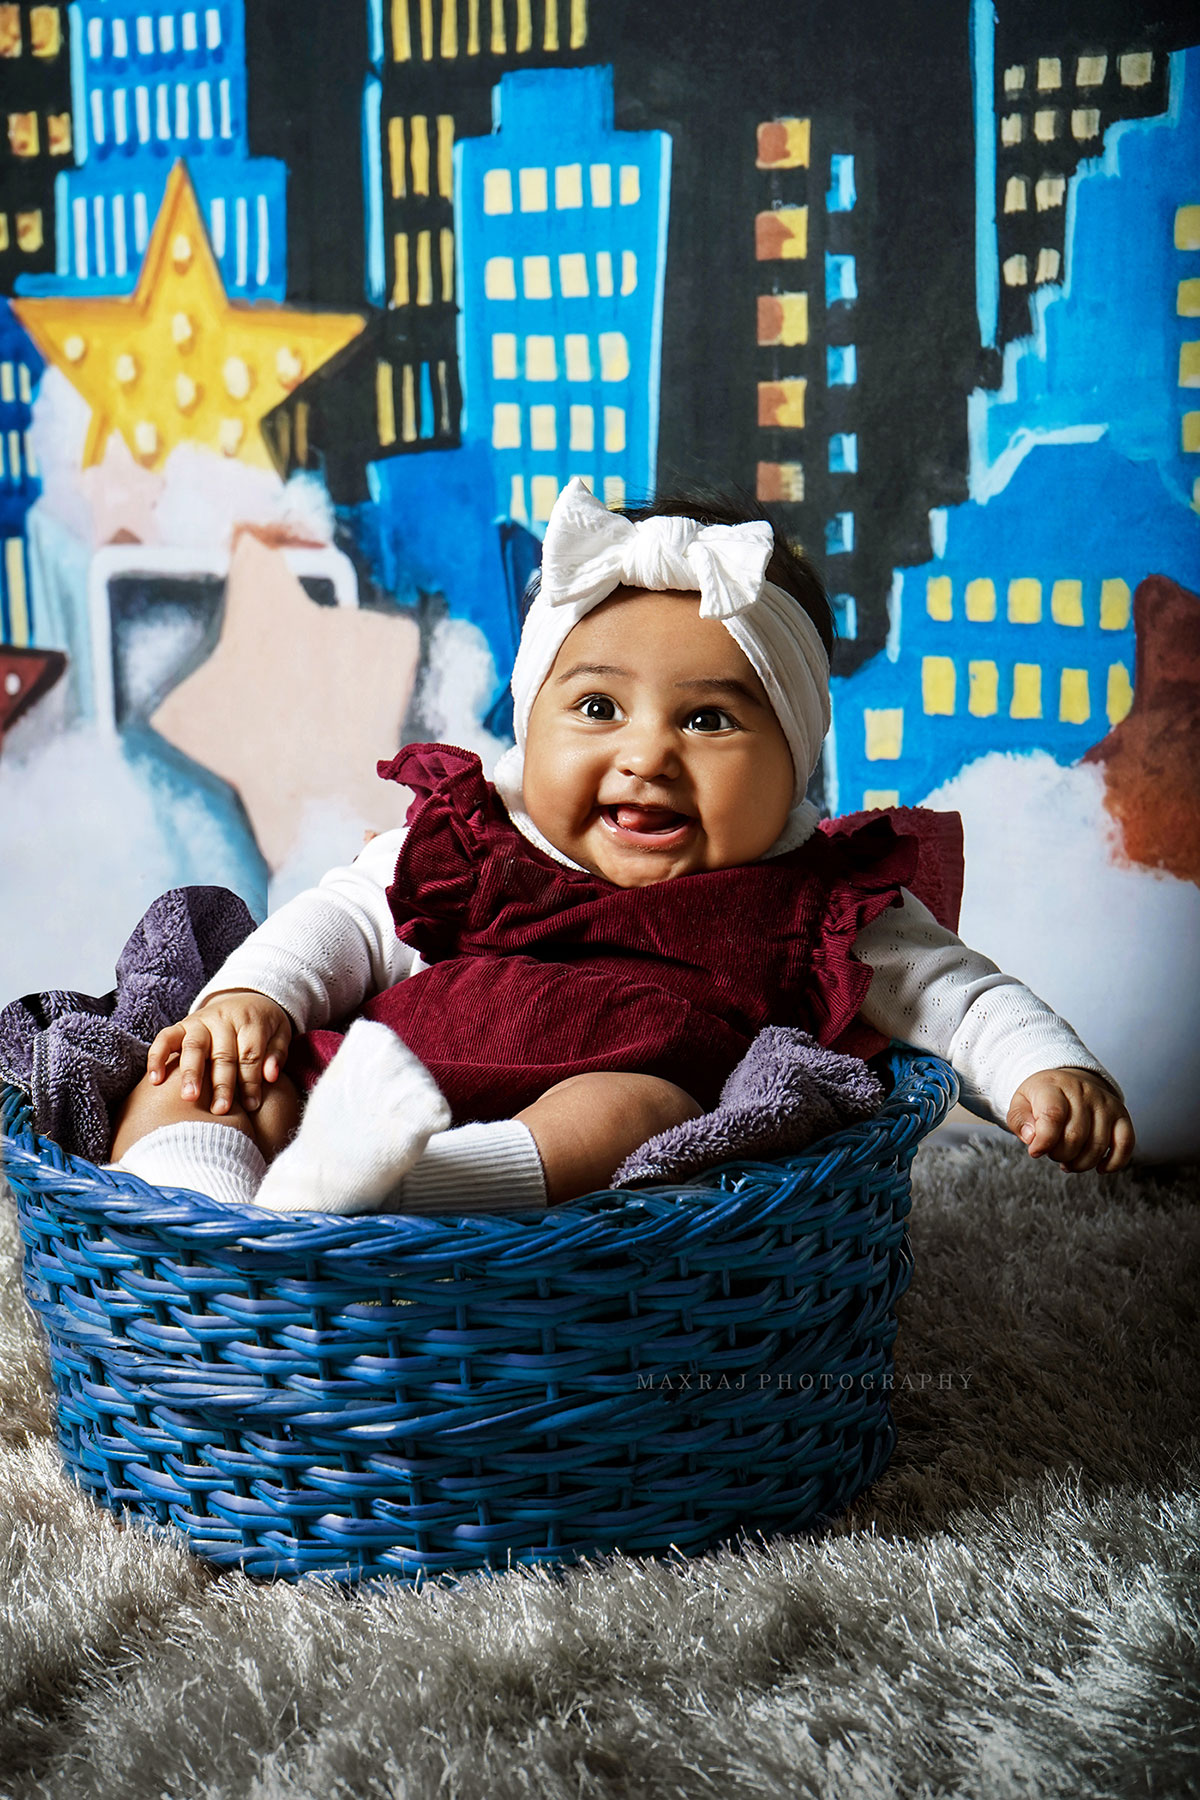 best baby photographer in pune, baby photoshoot in pune